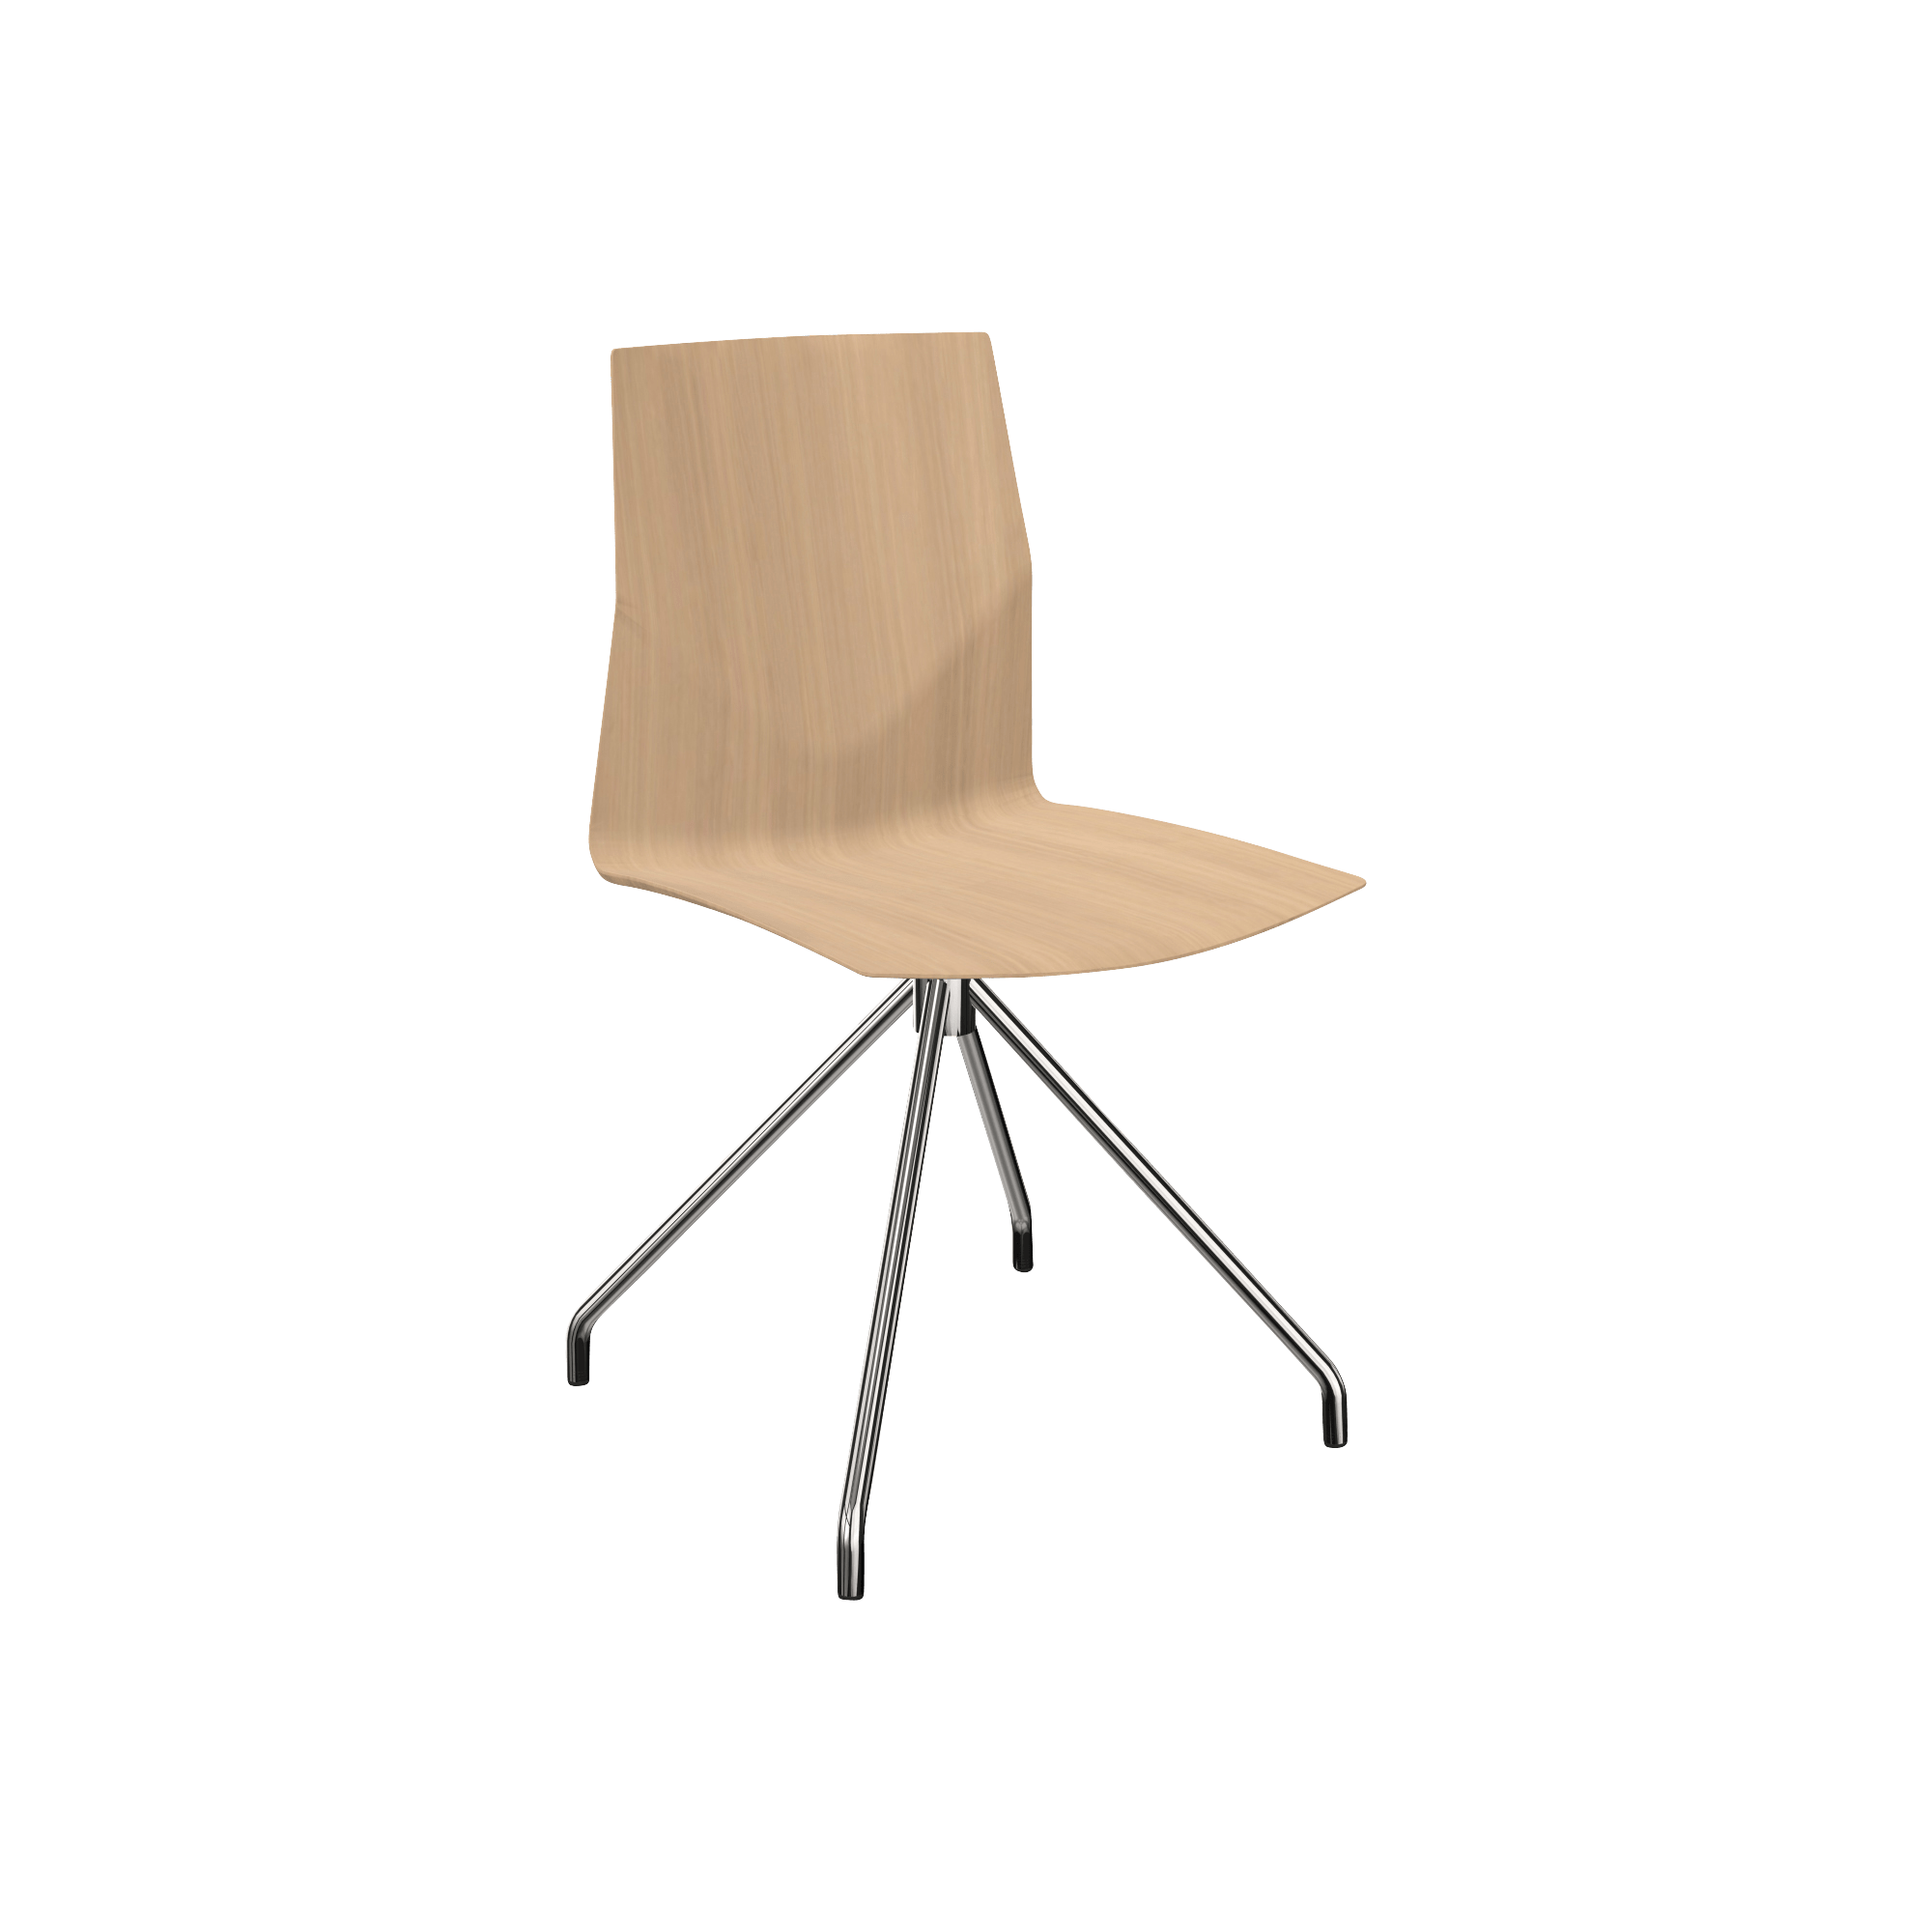 Wooden chair with chrome leg